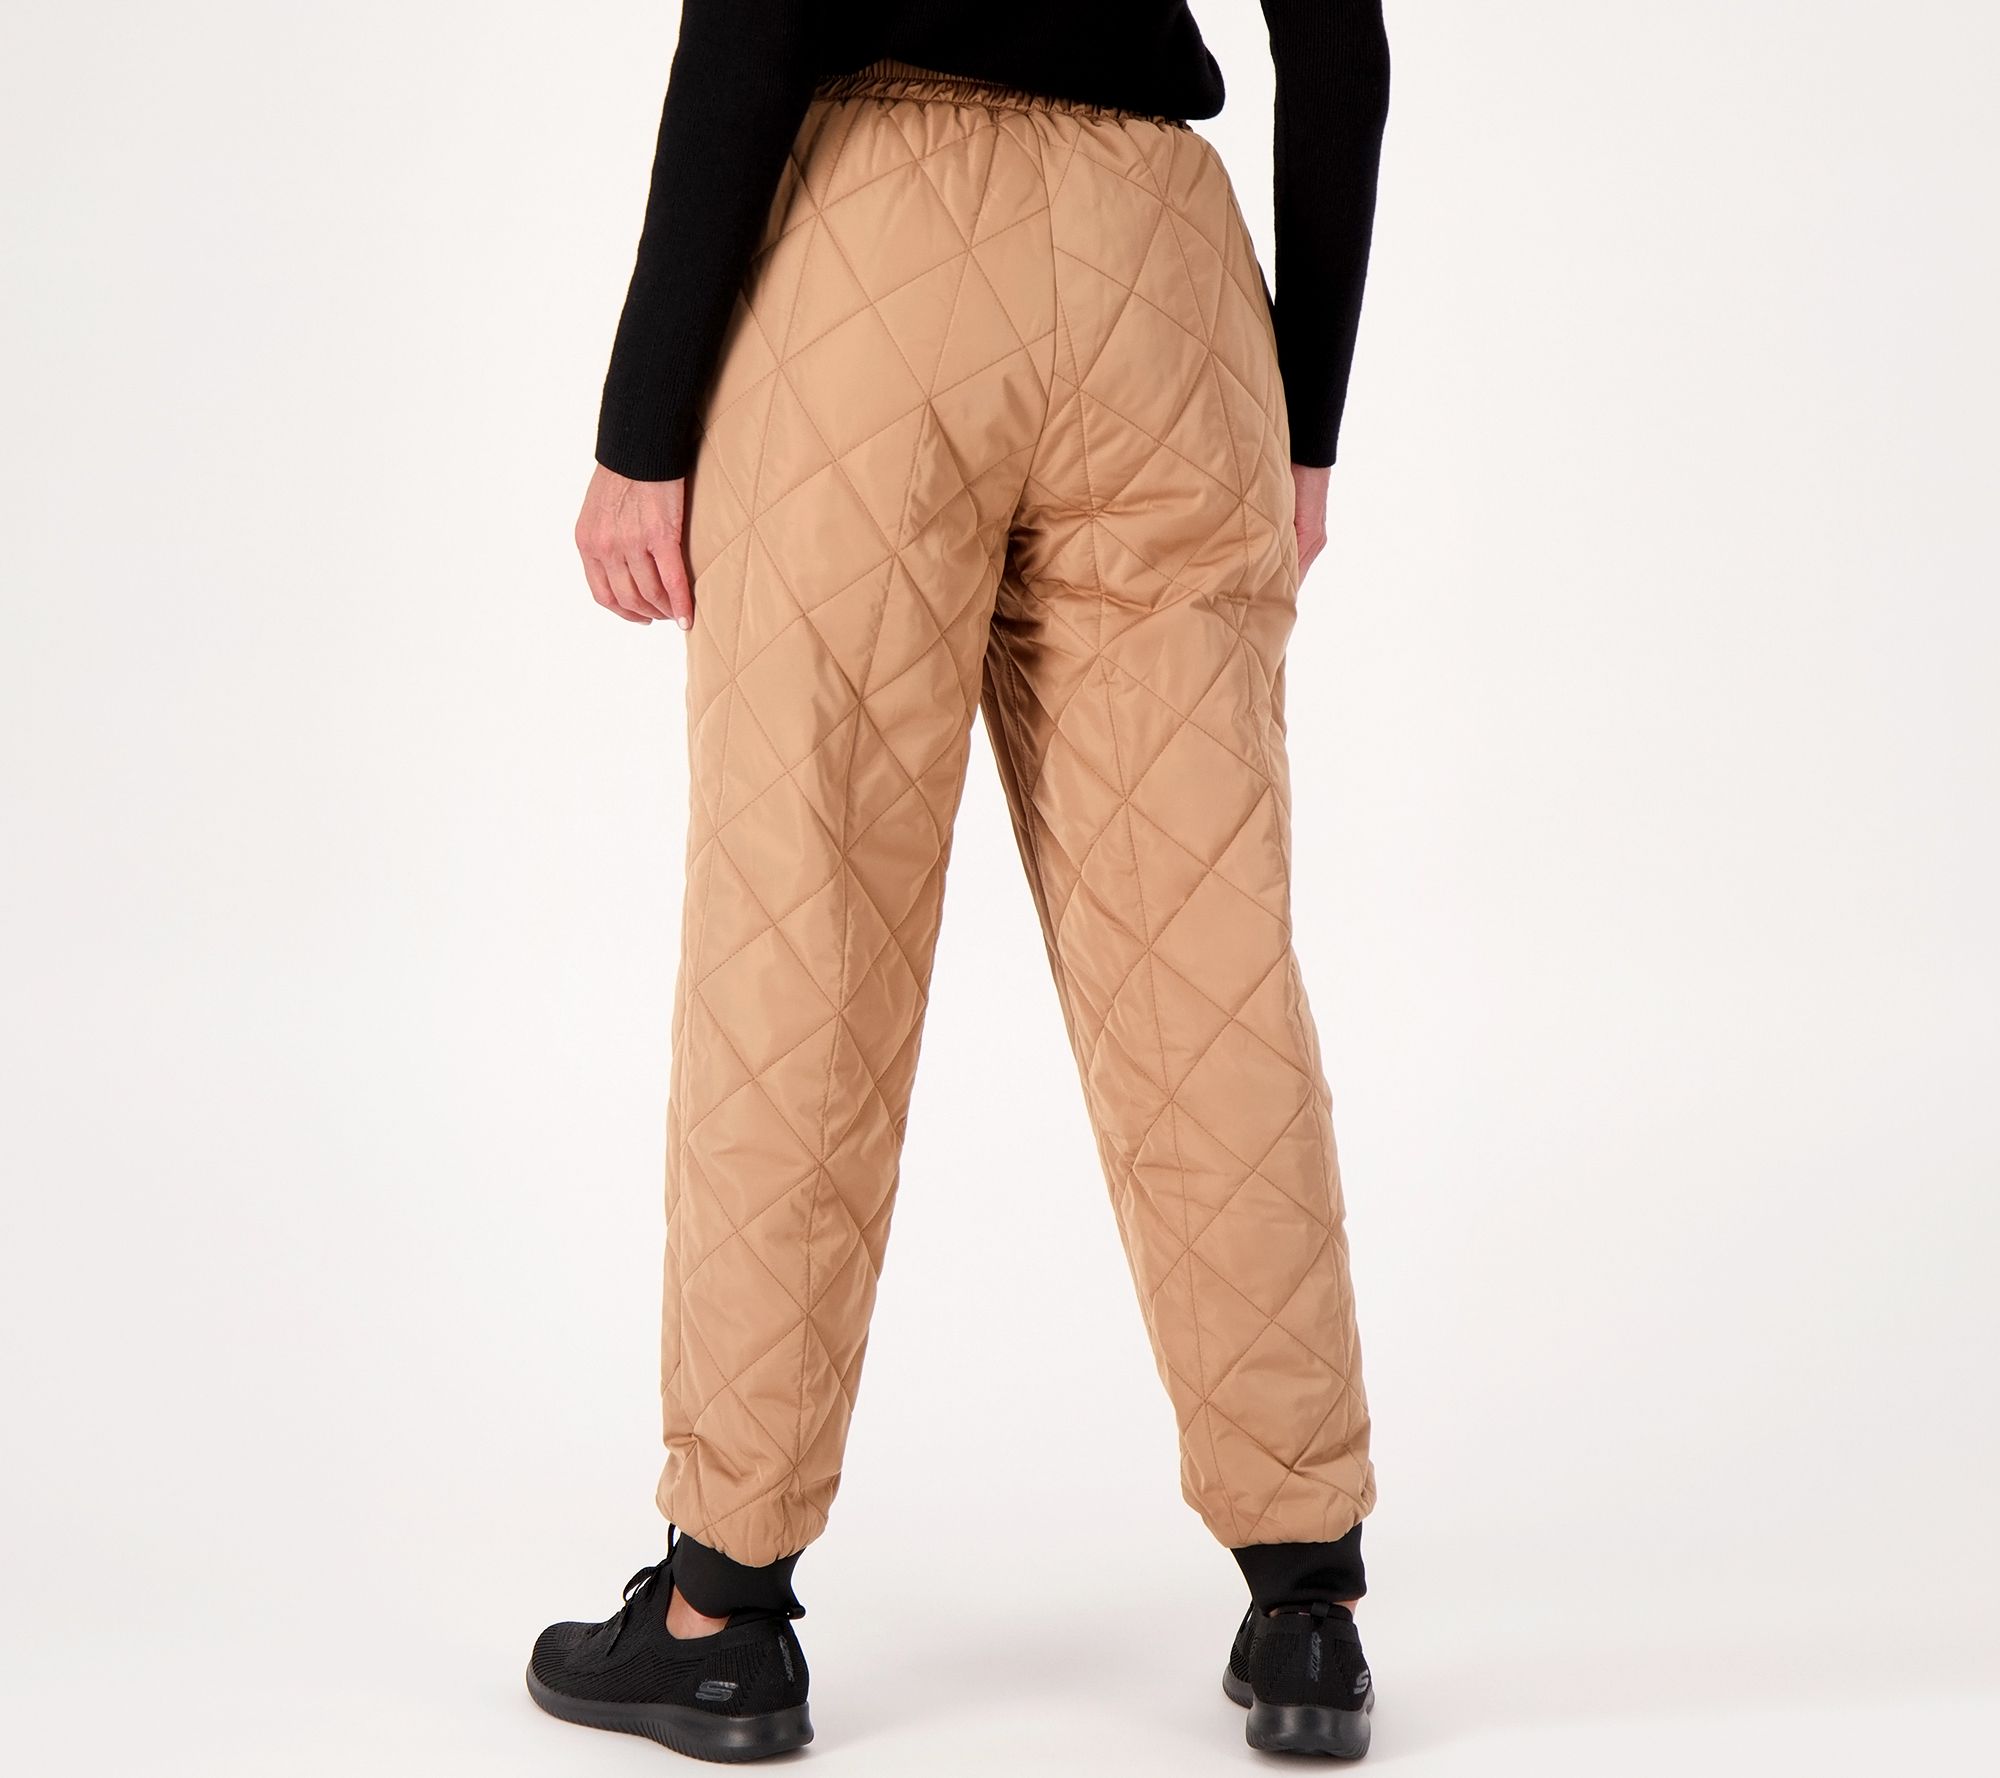 WOMEN'S DIAMOND QUILTED TROUSERS